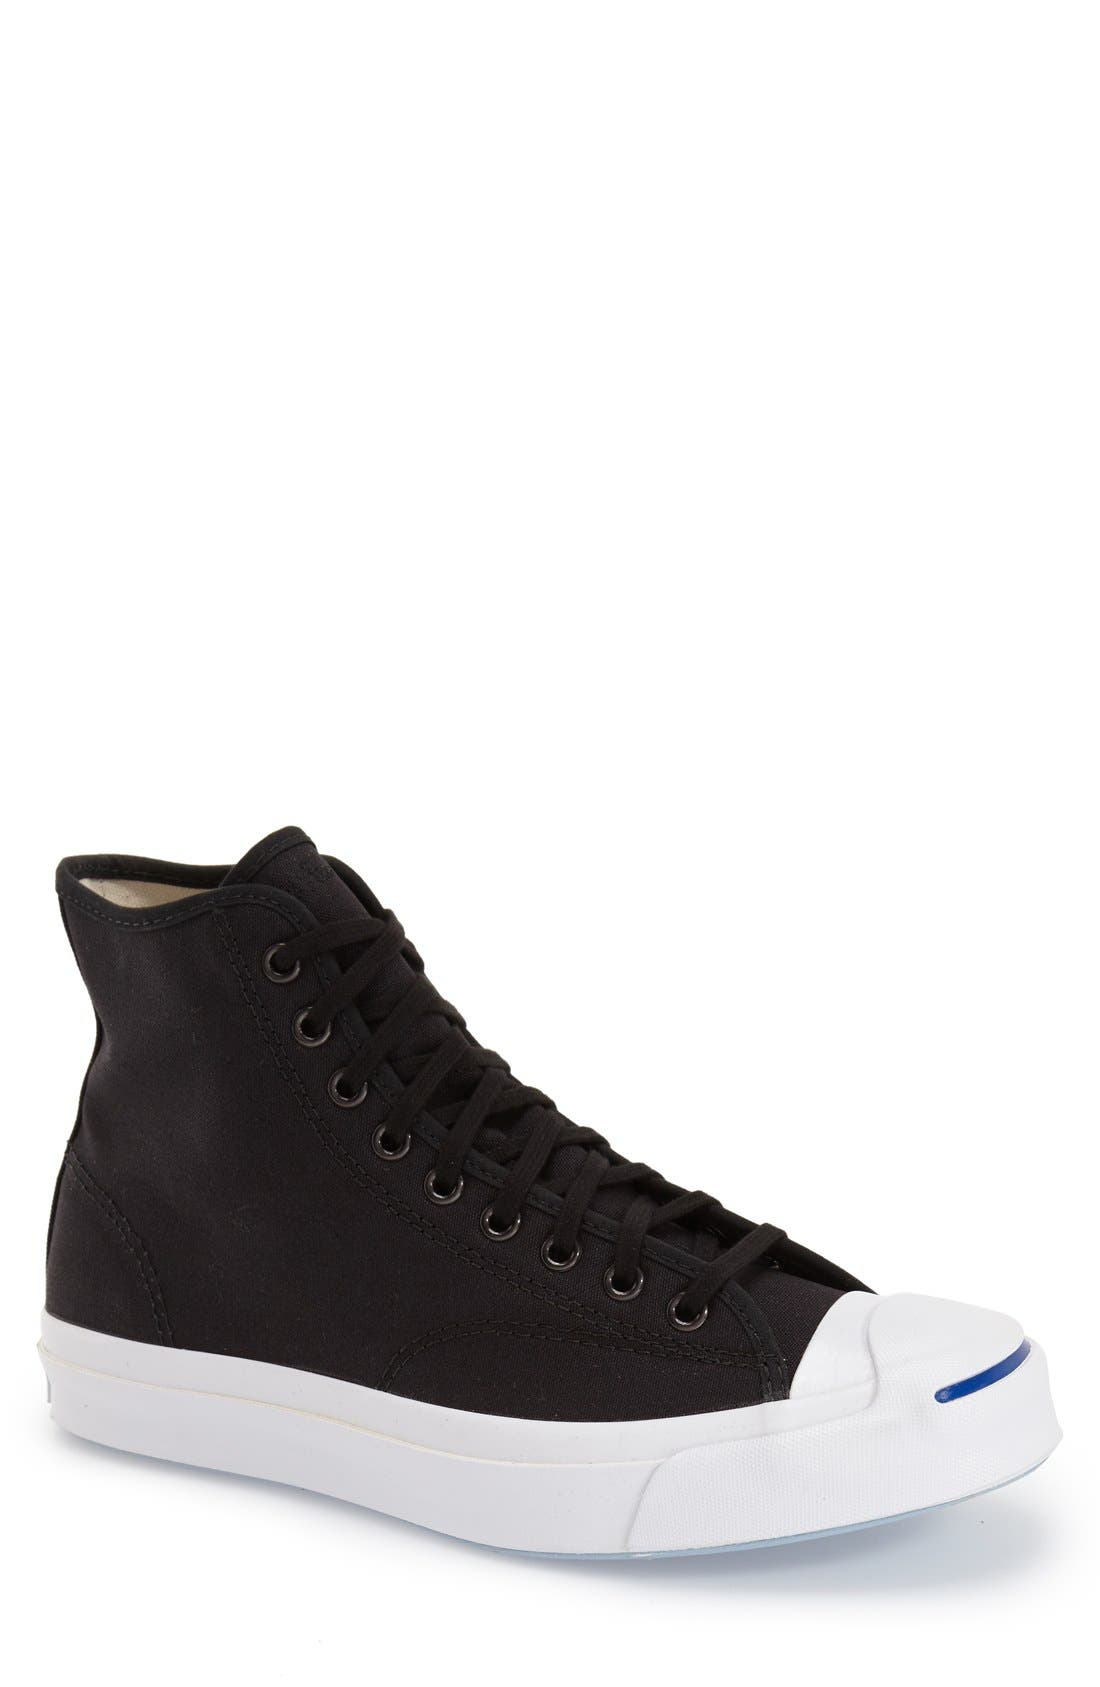 converse jack purcell duck